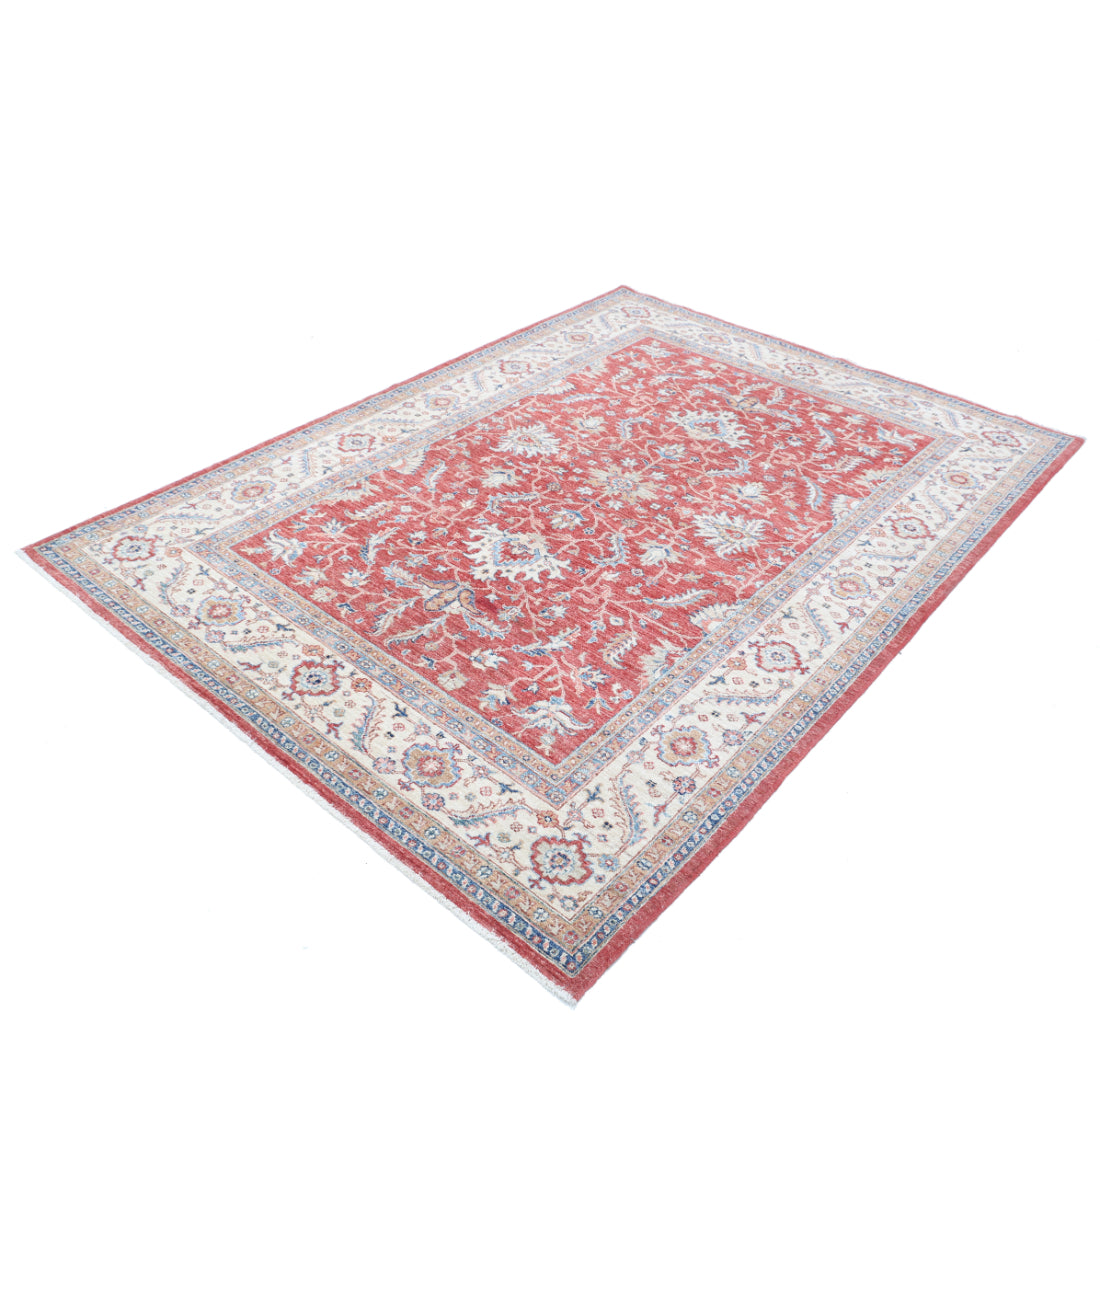 Hand Knotted Ziegler Farhan Wool Rug - 5'8'' x 7'9'' 5'8'' x 7'9'' (170 X 233) / Red / Ivory